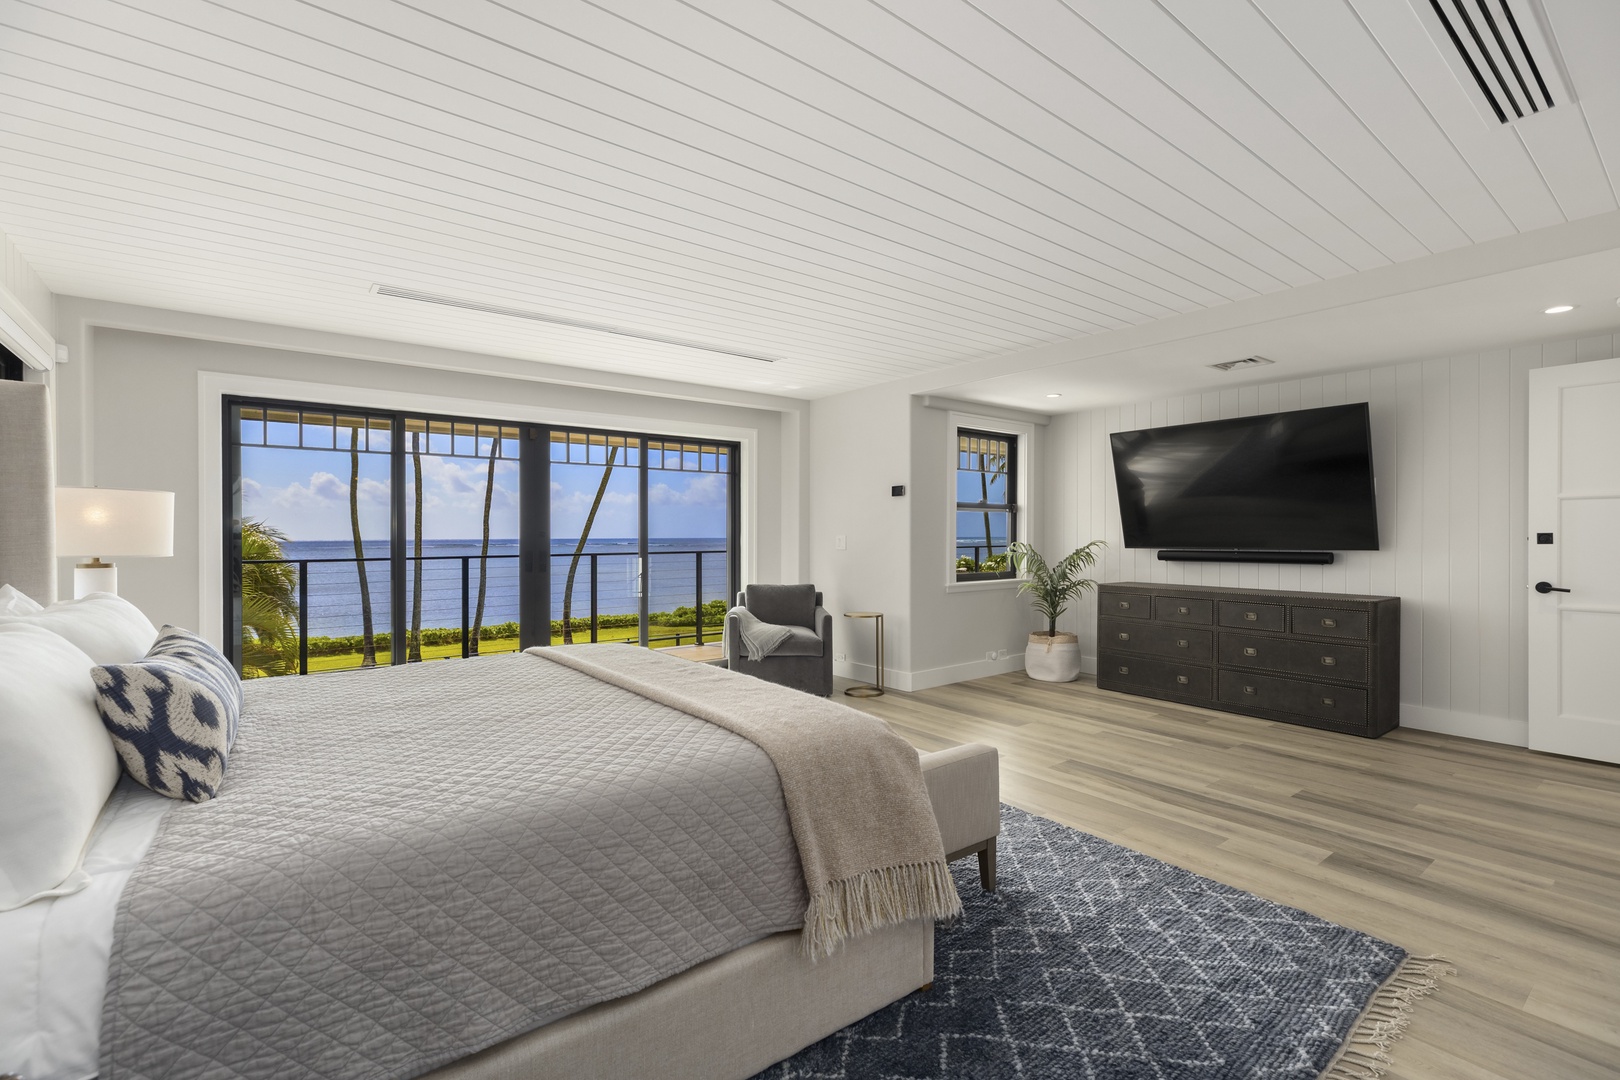 Honolulu Vacation Rentals, Niu Beach Estate - The secondary primary bedroom has a queen bed, lanai with ocean views, and private ensuite with a dual vanity and shower